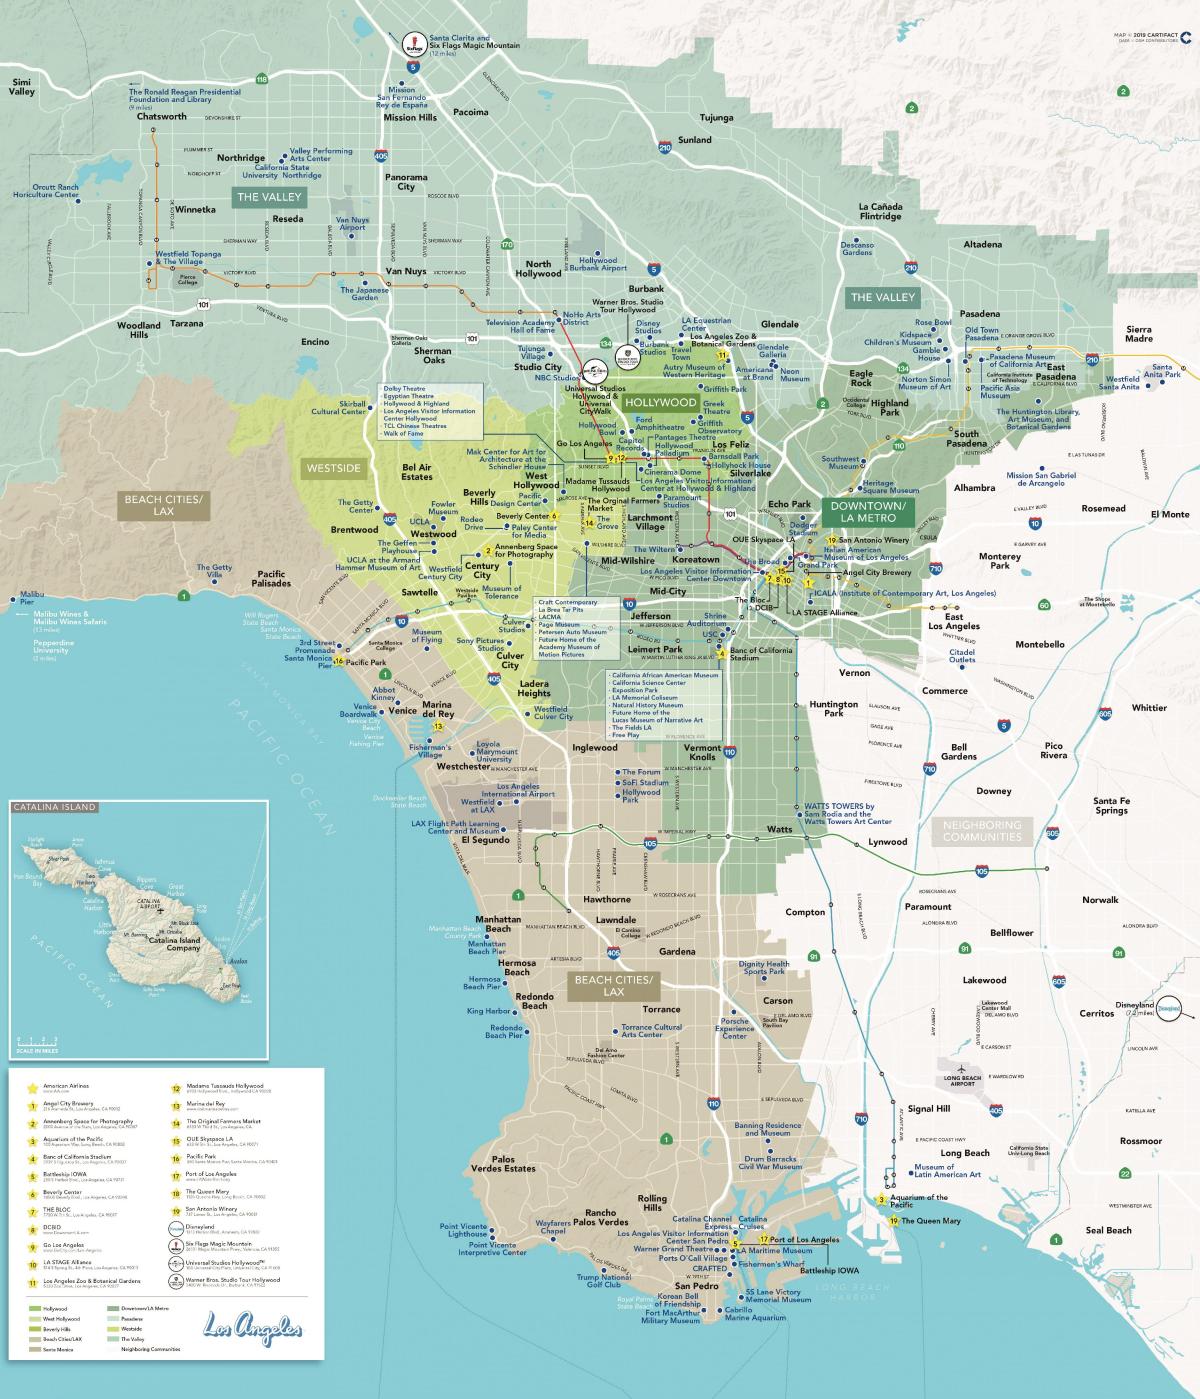 Los Angeles on a map